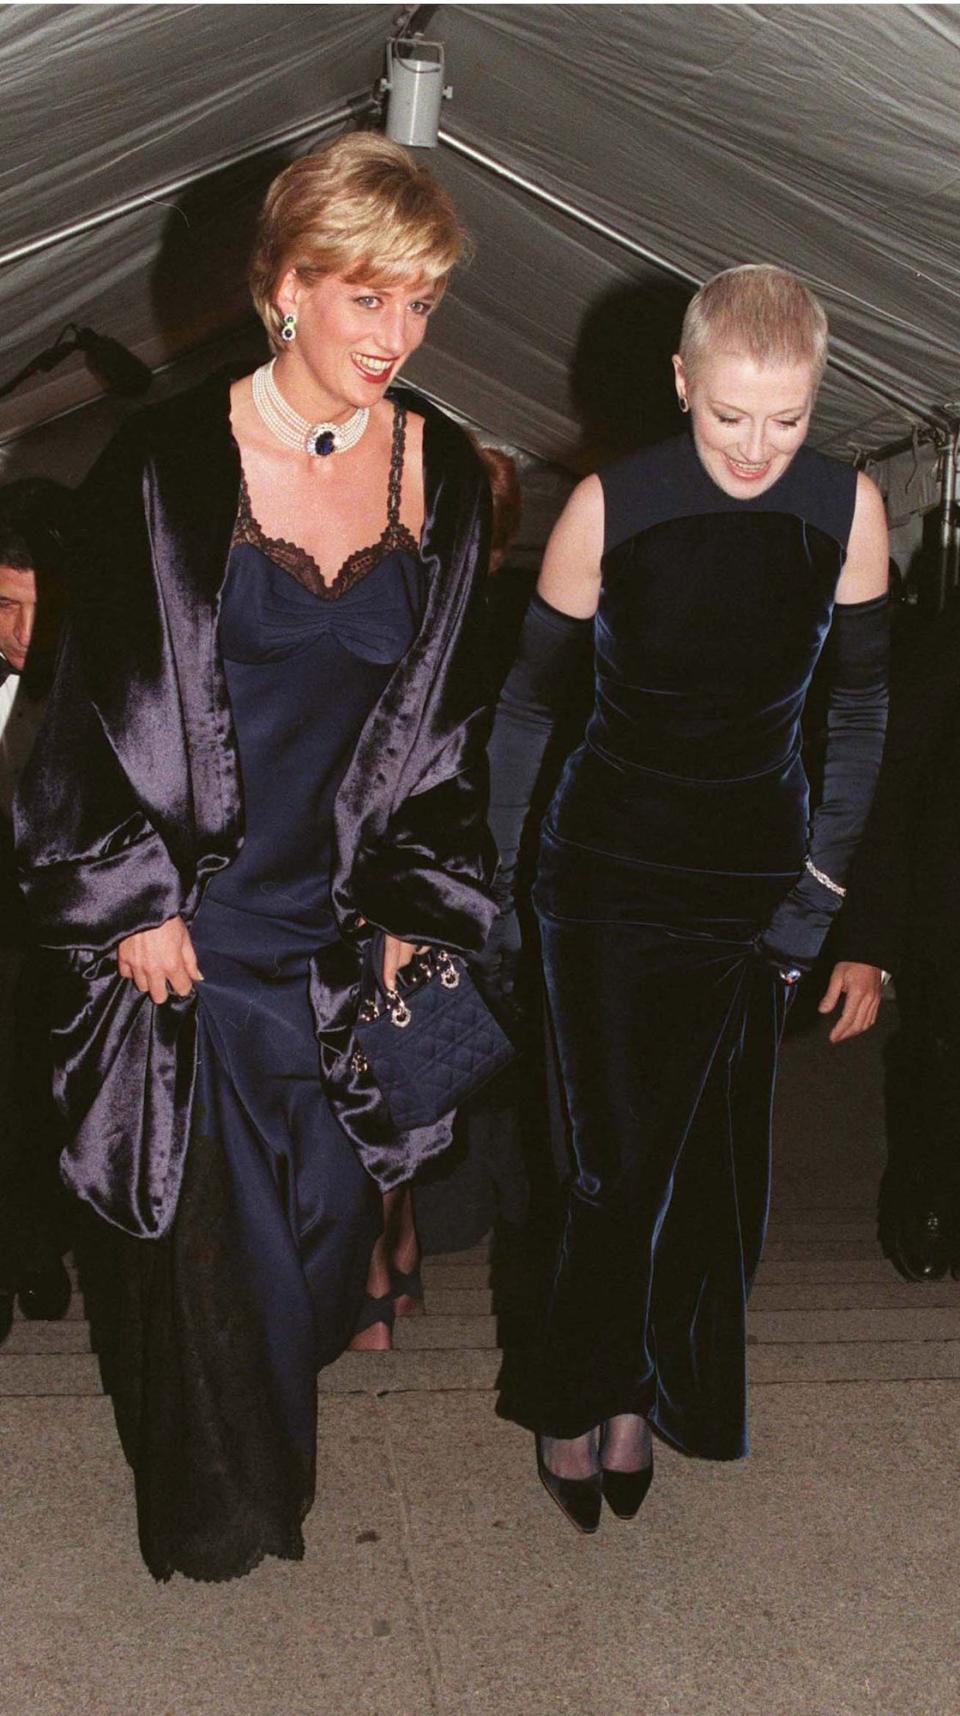 Princess Diana walks up the steps at the 1996 Met Gala, wearing a navy blue slip dress with lace trim and a black shawl. Her friend Liz Tilberis stands next to her, wearing a navy blue velvet gown.